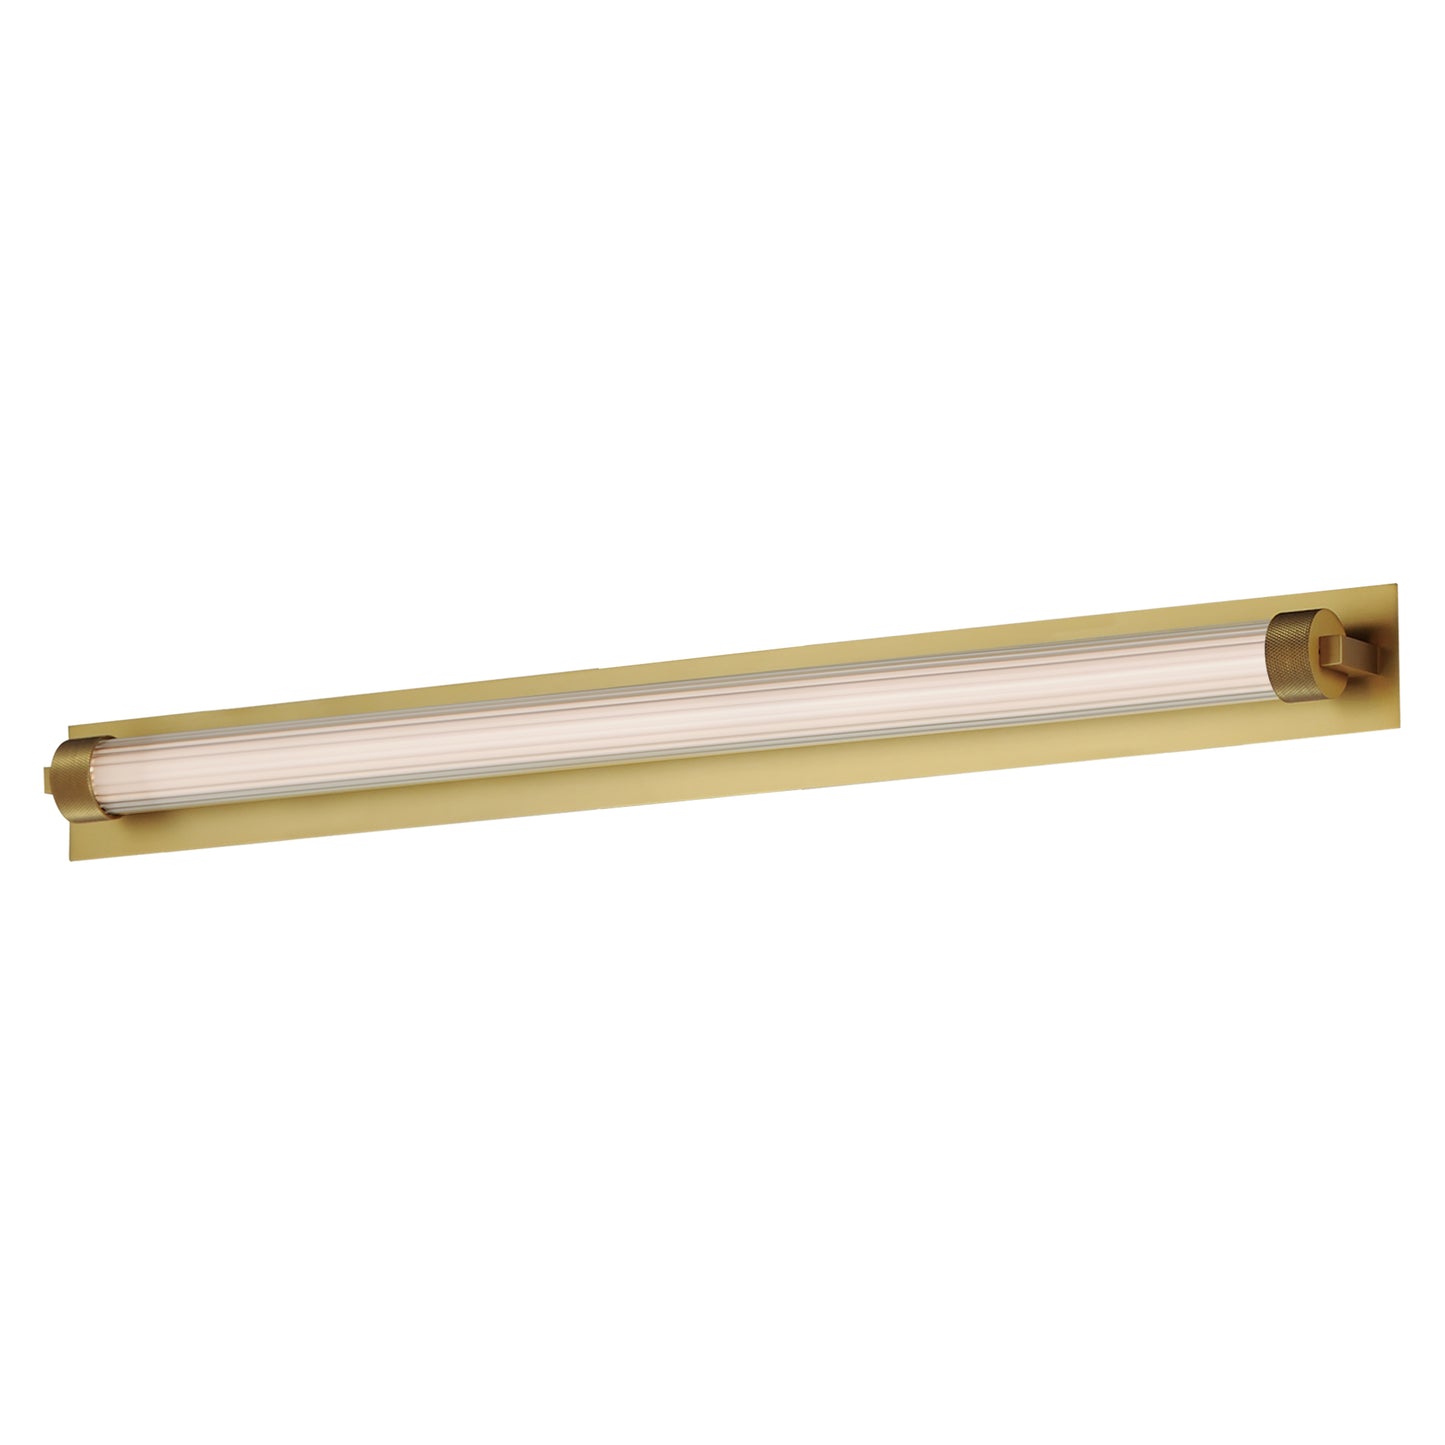 E23484-144NAB - Doric 30" Wall Sconce - Natural Aged Brass